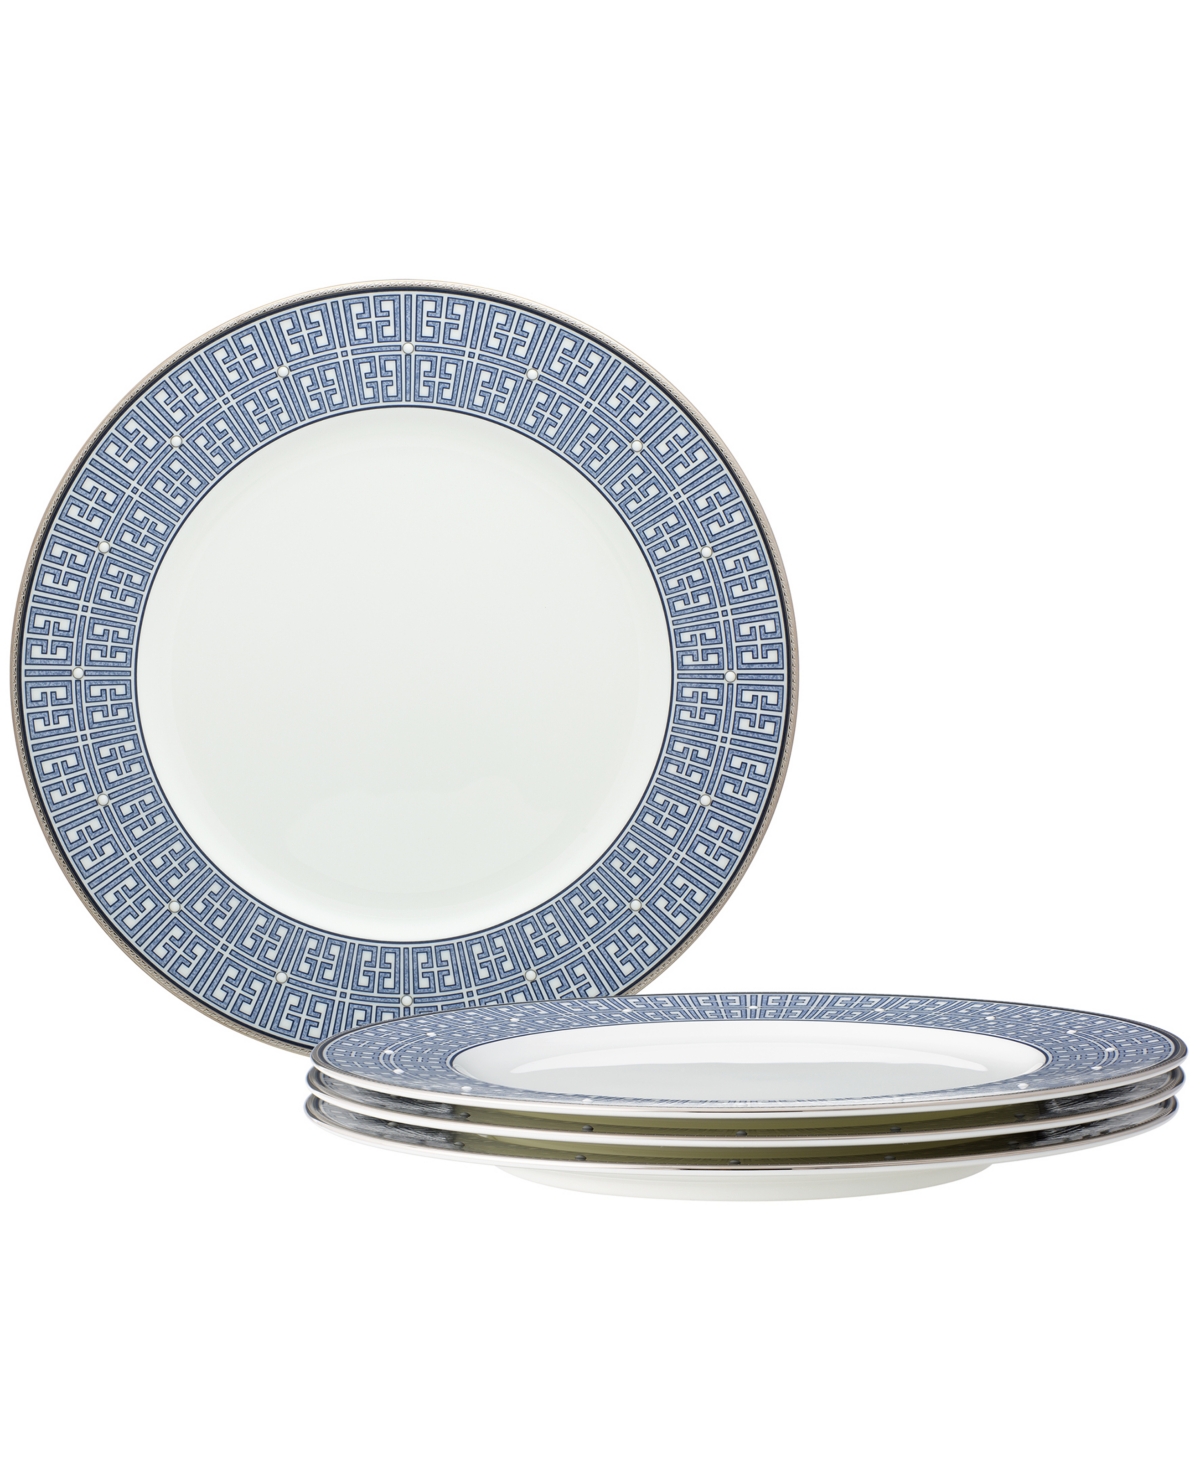 Noritake Infinity 4 Piece Dinner Plate Set, Service For 4 In Blue